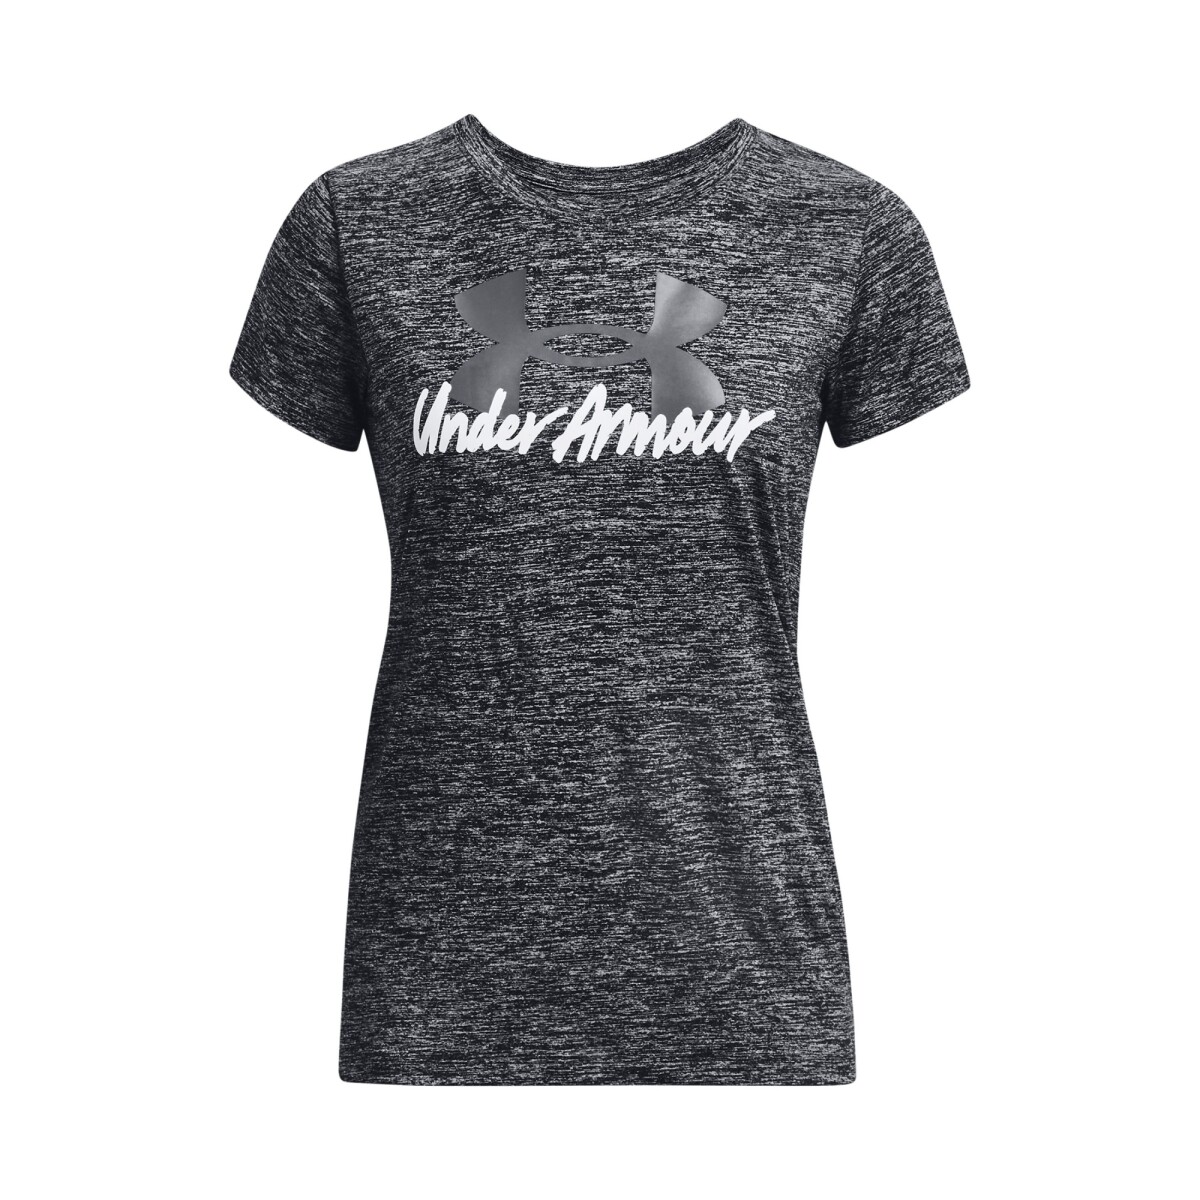 Remera Under Armour Tech Twst Graphic Ss - NEGRO 